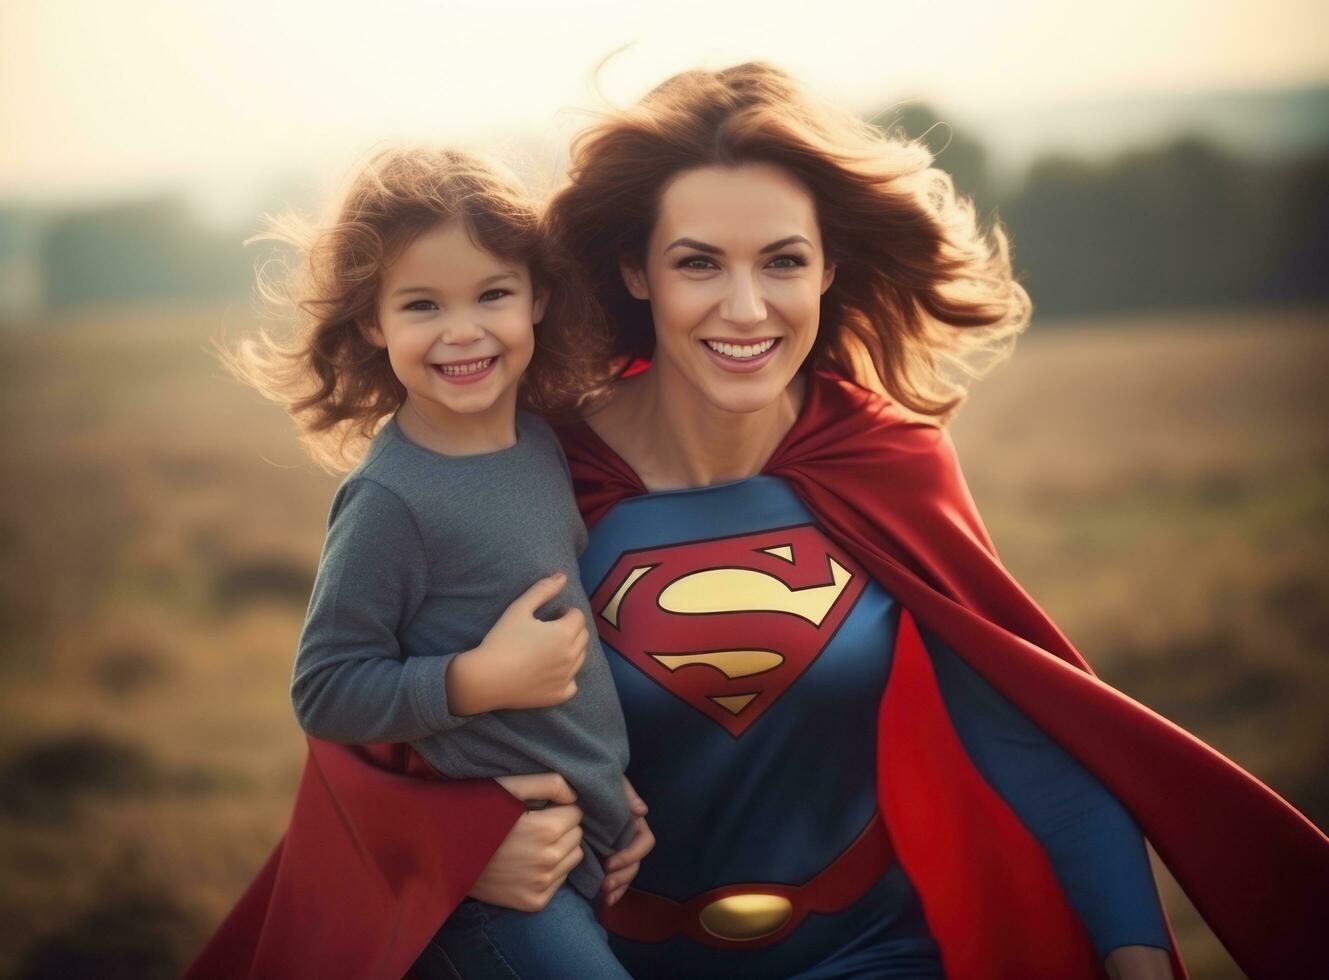 A woman dressed as a super hero and her daughter in spandex holding her photo